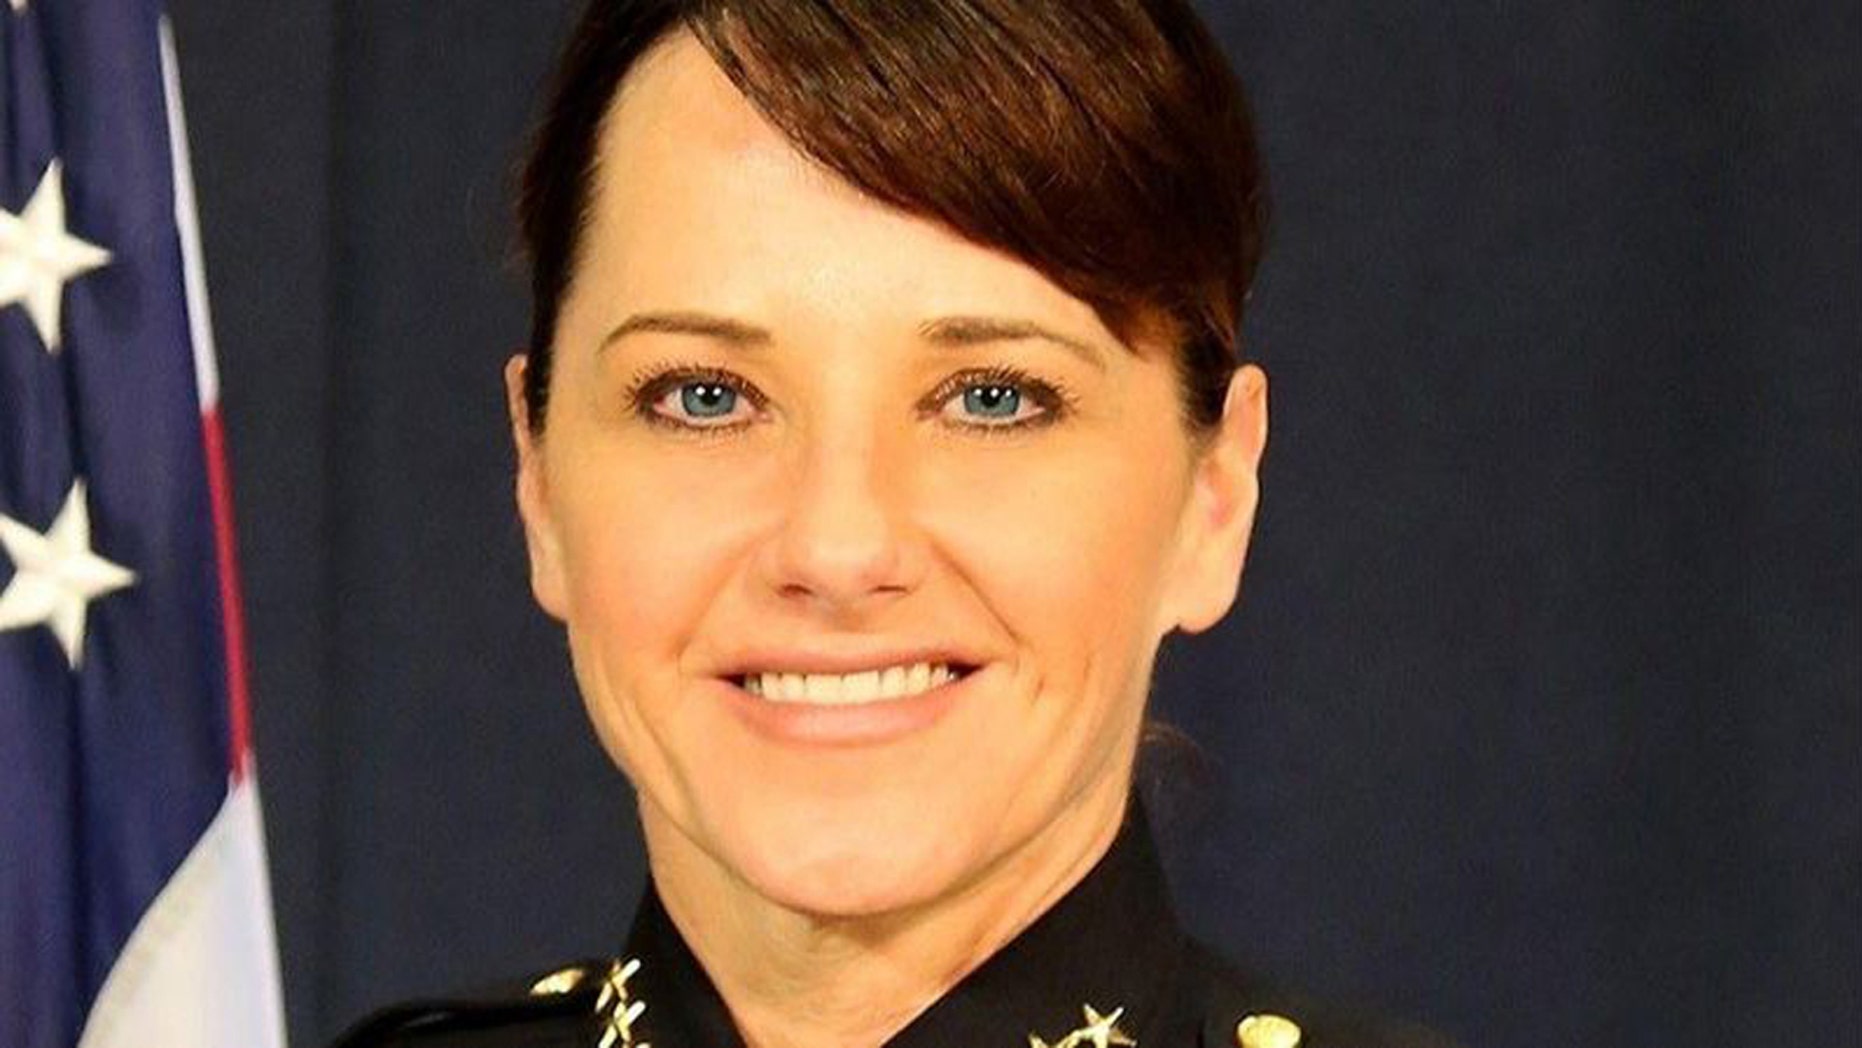 Female Beverly Hills police chief accused of racism, anti-Semitism amid $2.3 million settlement